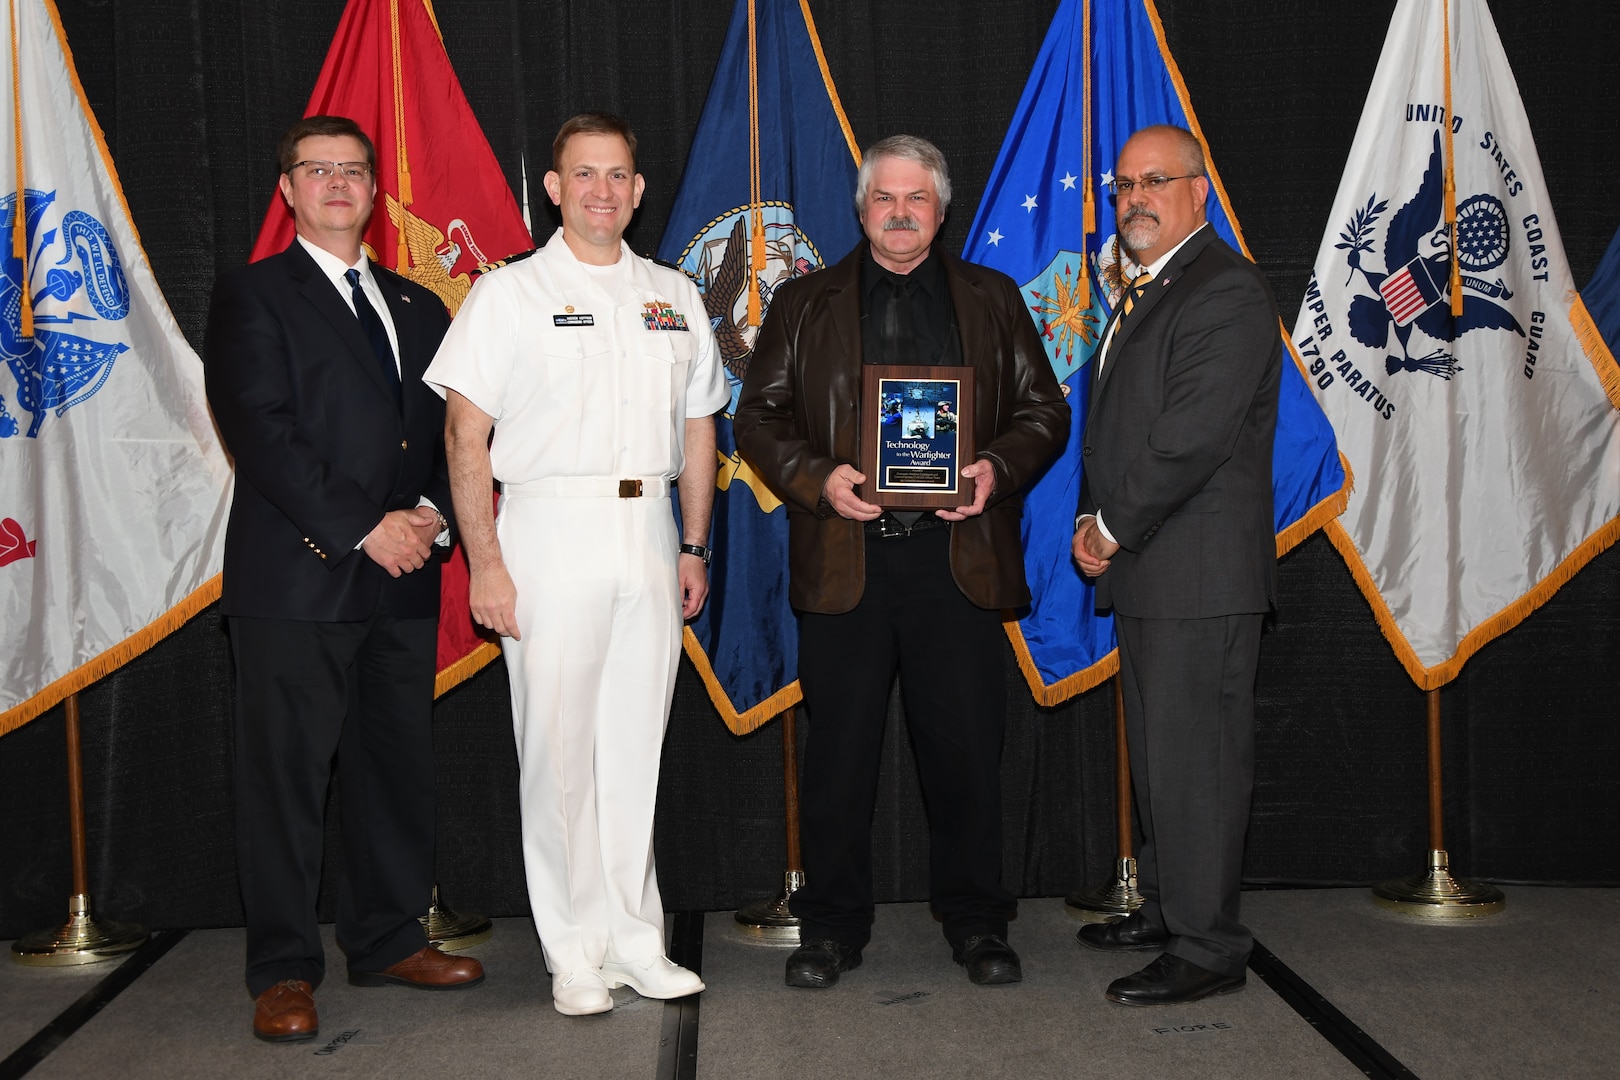 IMAGE: The Common Aviation Command and
Control System Afloat Team received the Technology to the Warfighter Award at the NSWCDD Honorary Awards Ceremony held at the Fredericksburg Expo and Conference Center, April 26. The Technology to the Warfighter Award recognizes individuals or groups who have had a notable and significant impact on the warfighter by developing needed capability and transitioning it into operations. The intent of this award is to recognize direct contributions to the warfighter and their operational impact.